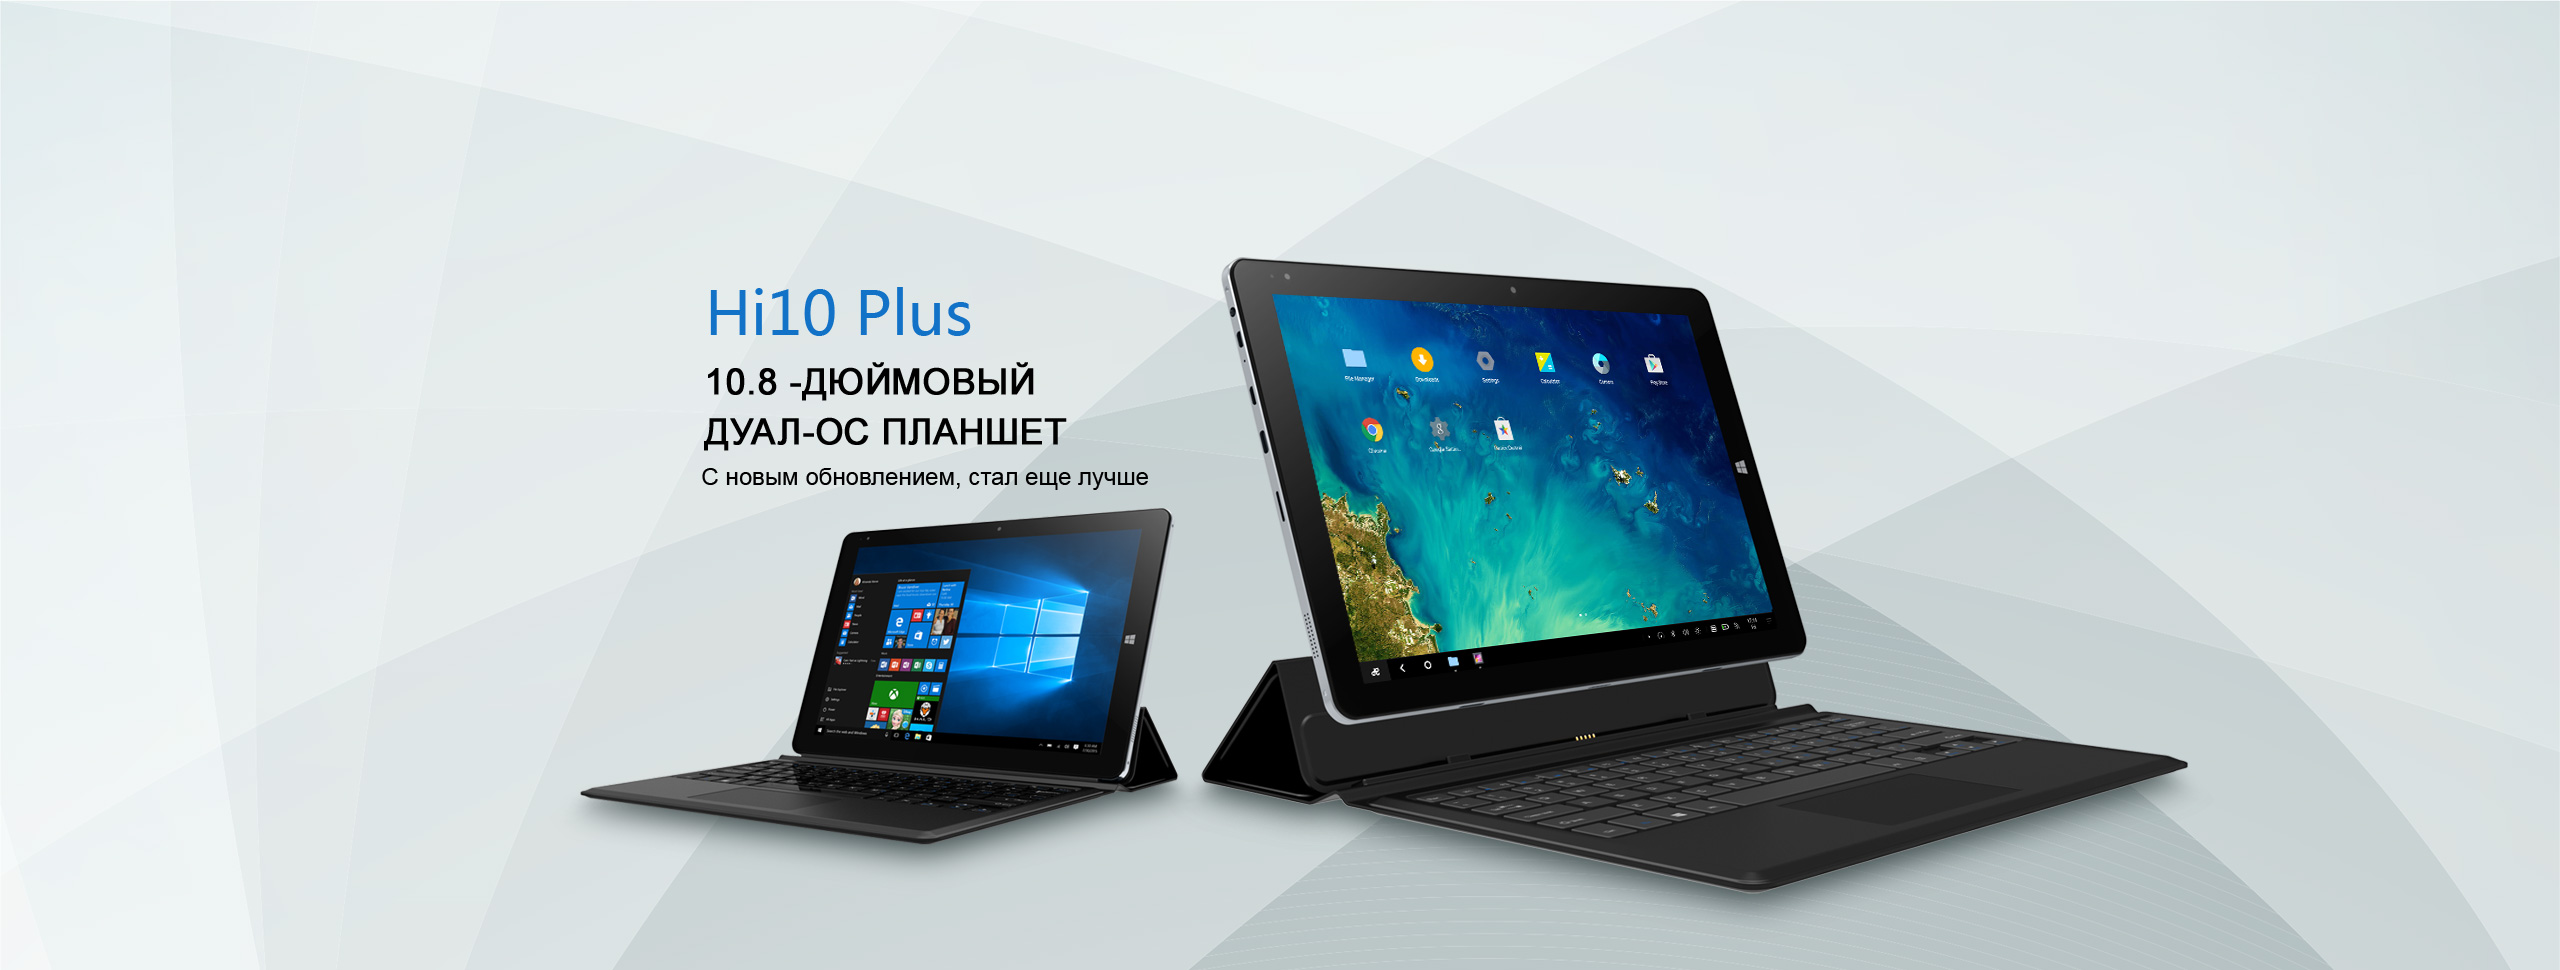 Hi10 Plus-Tablet PC-Products-Chuwi Official-Laptop, Android